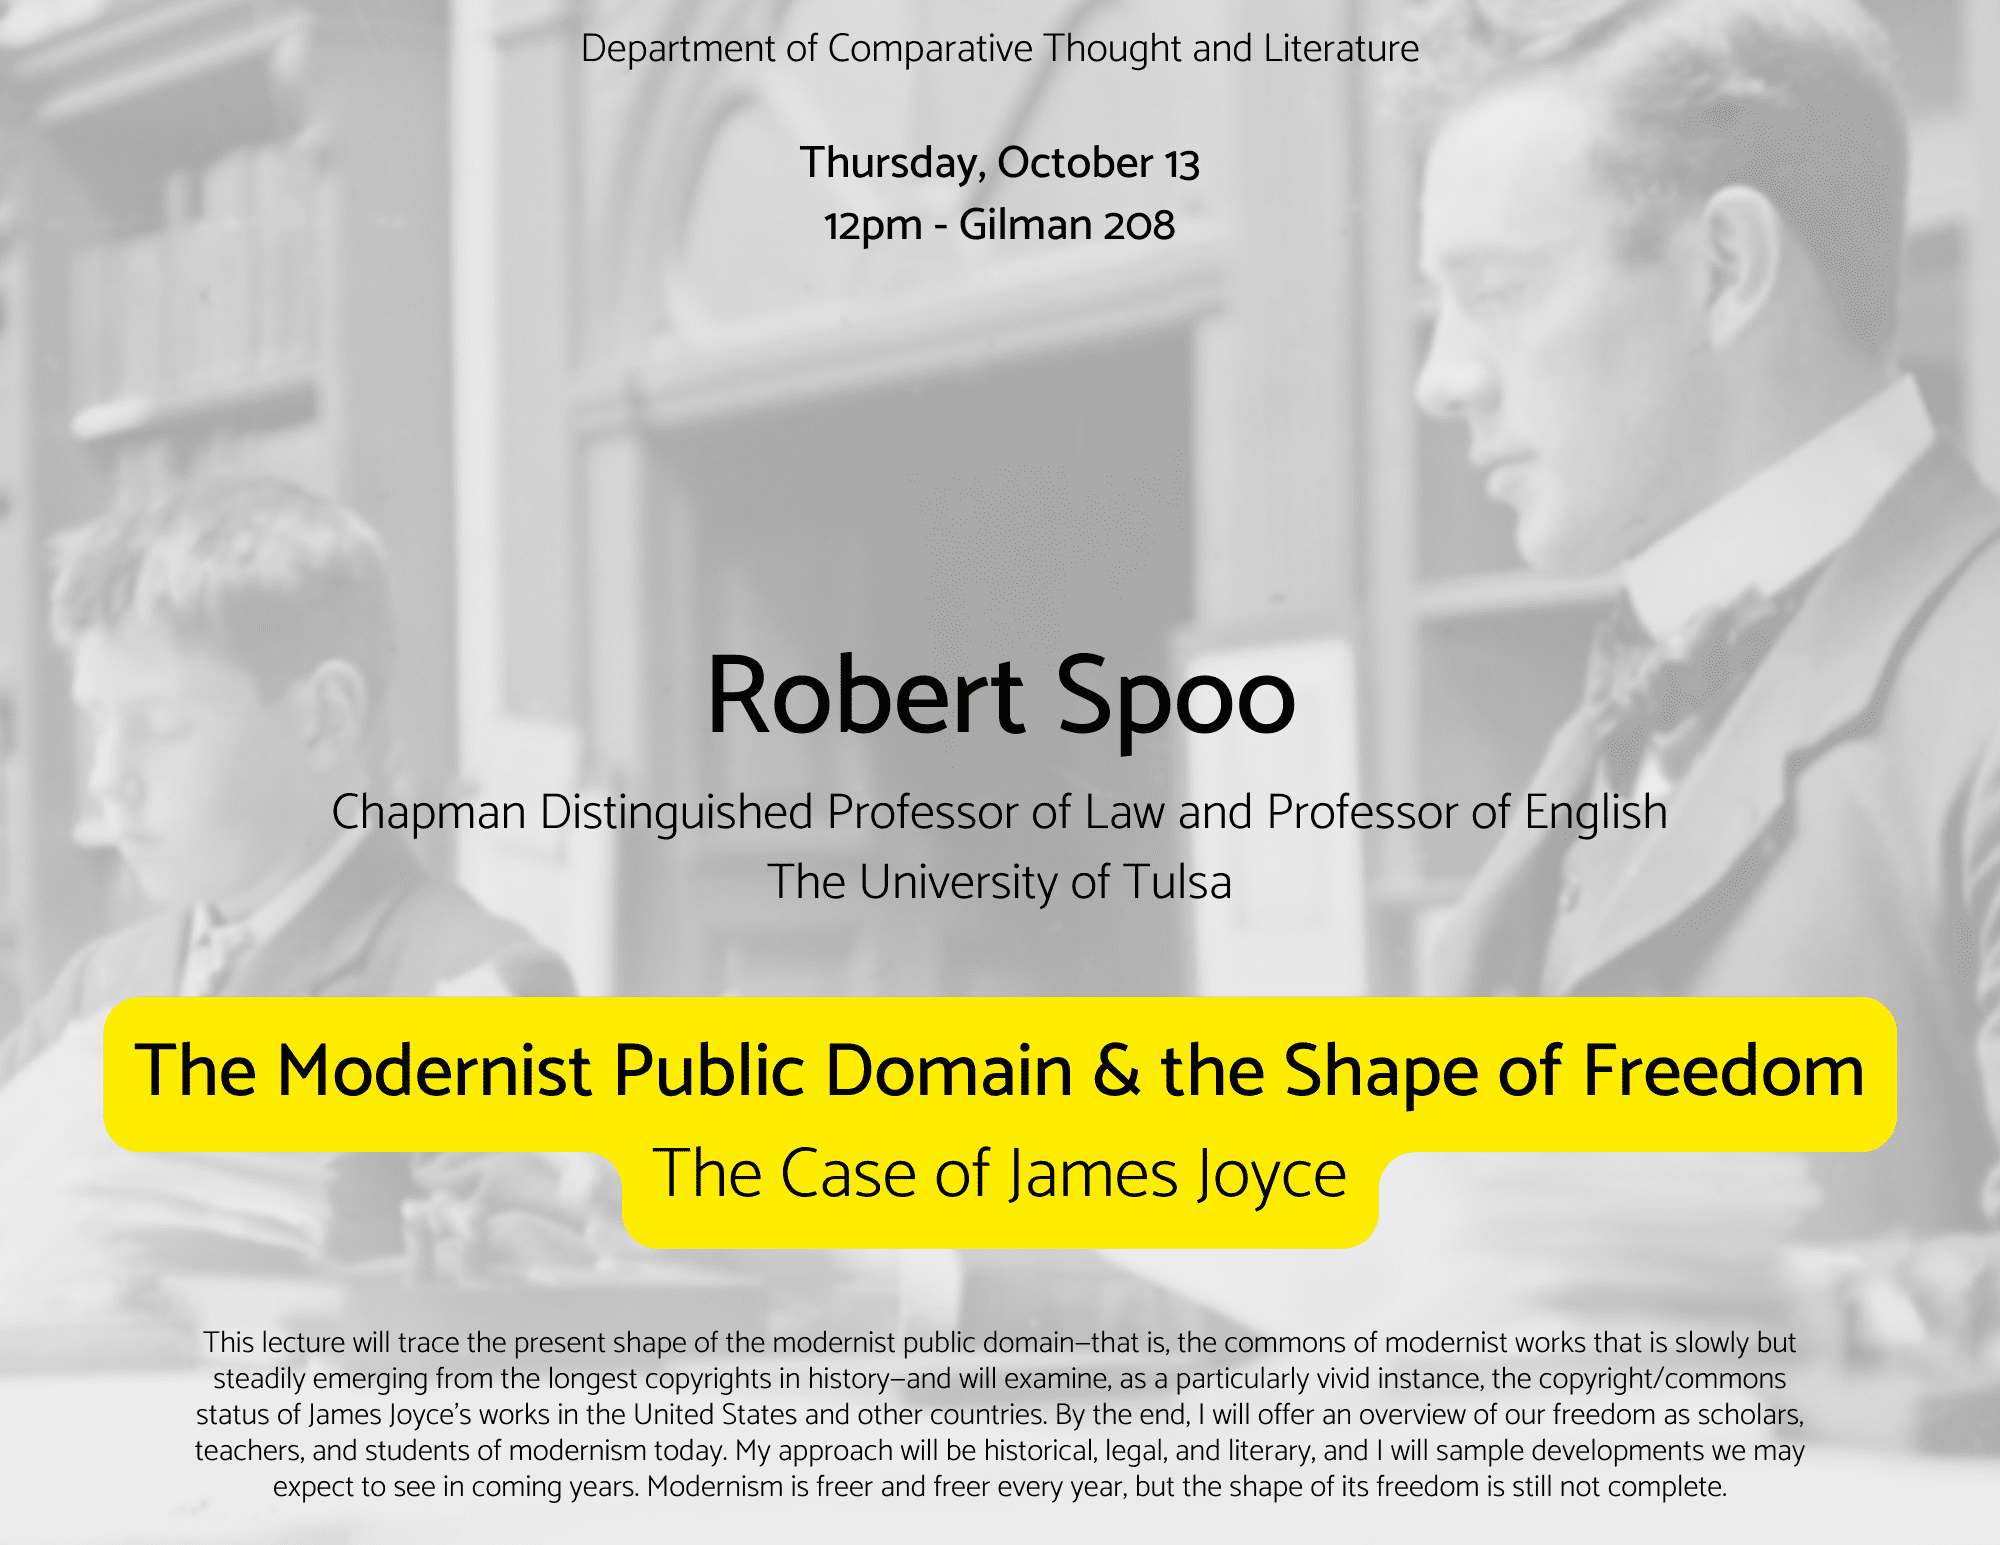 robert spoo talk poster. all event details are listed in text on this page.